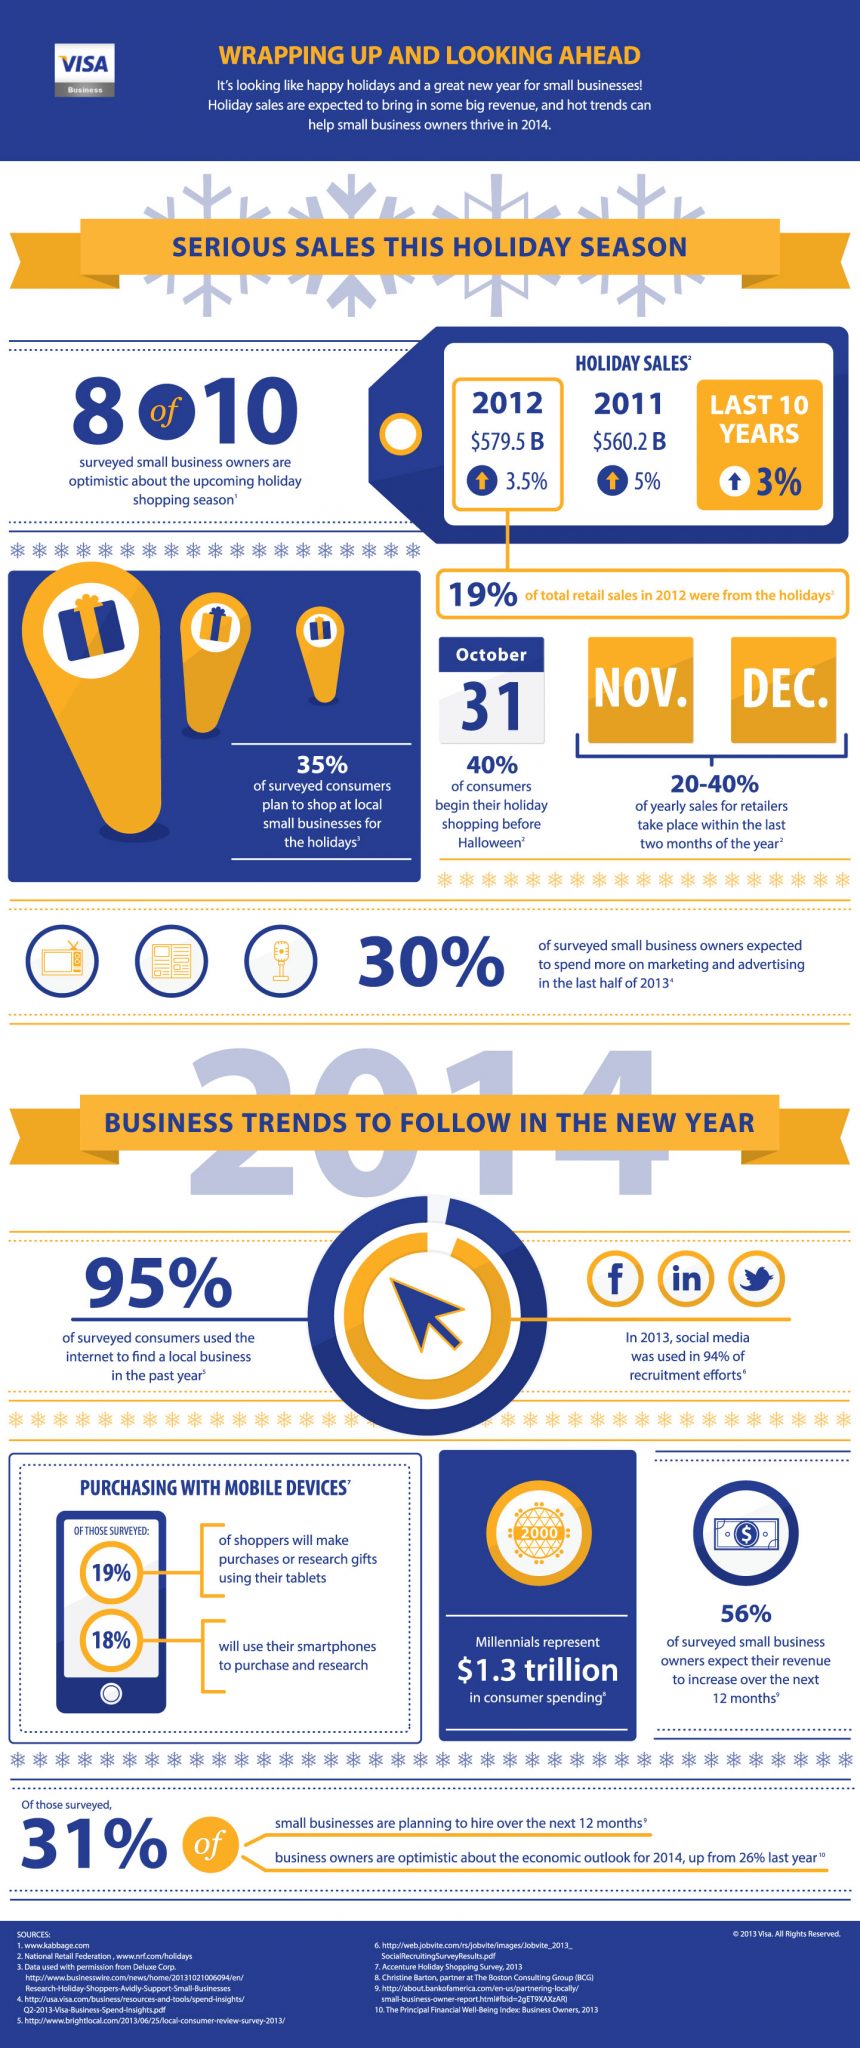 Infographic research and design by Visa Business.